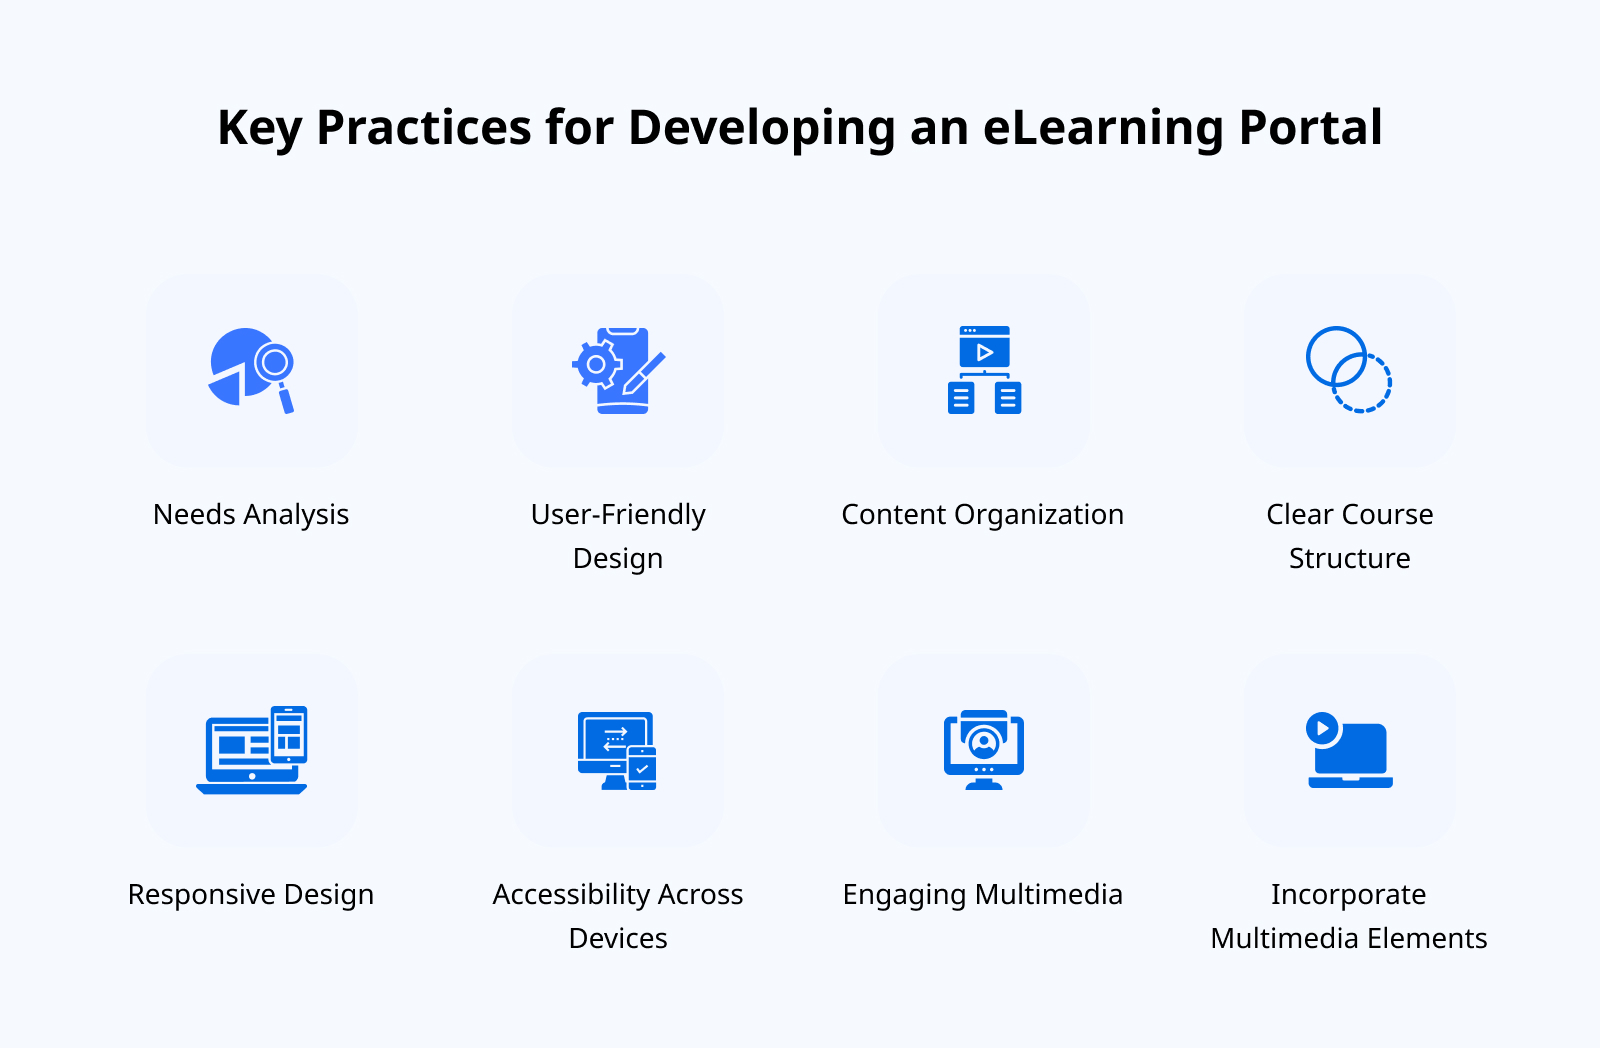 Key Practices for Developing an eLearning Portal